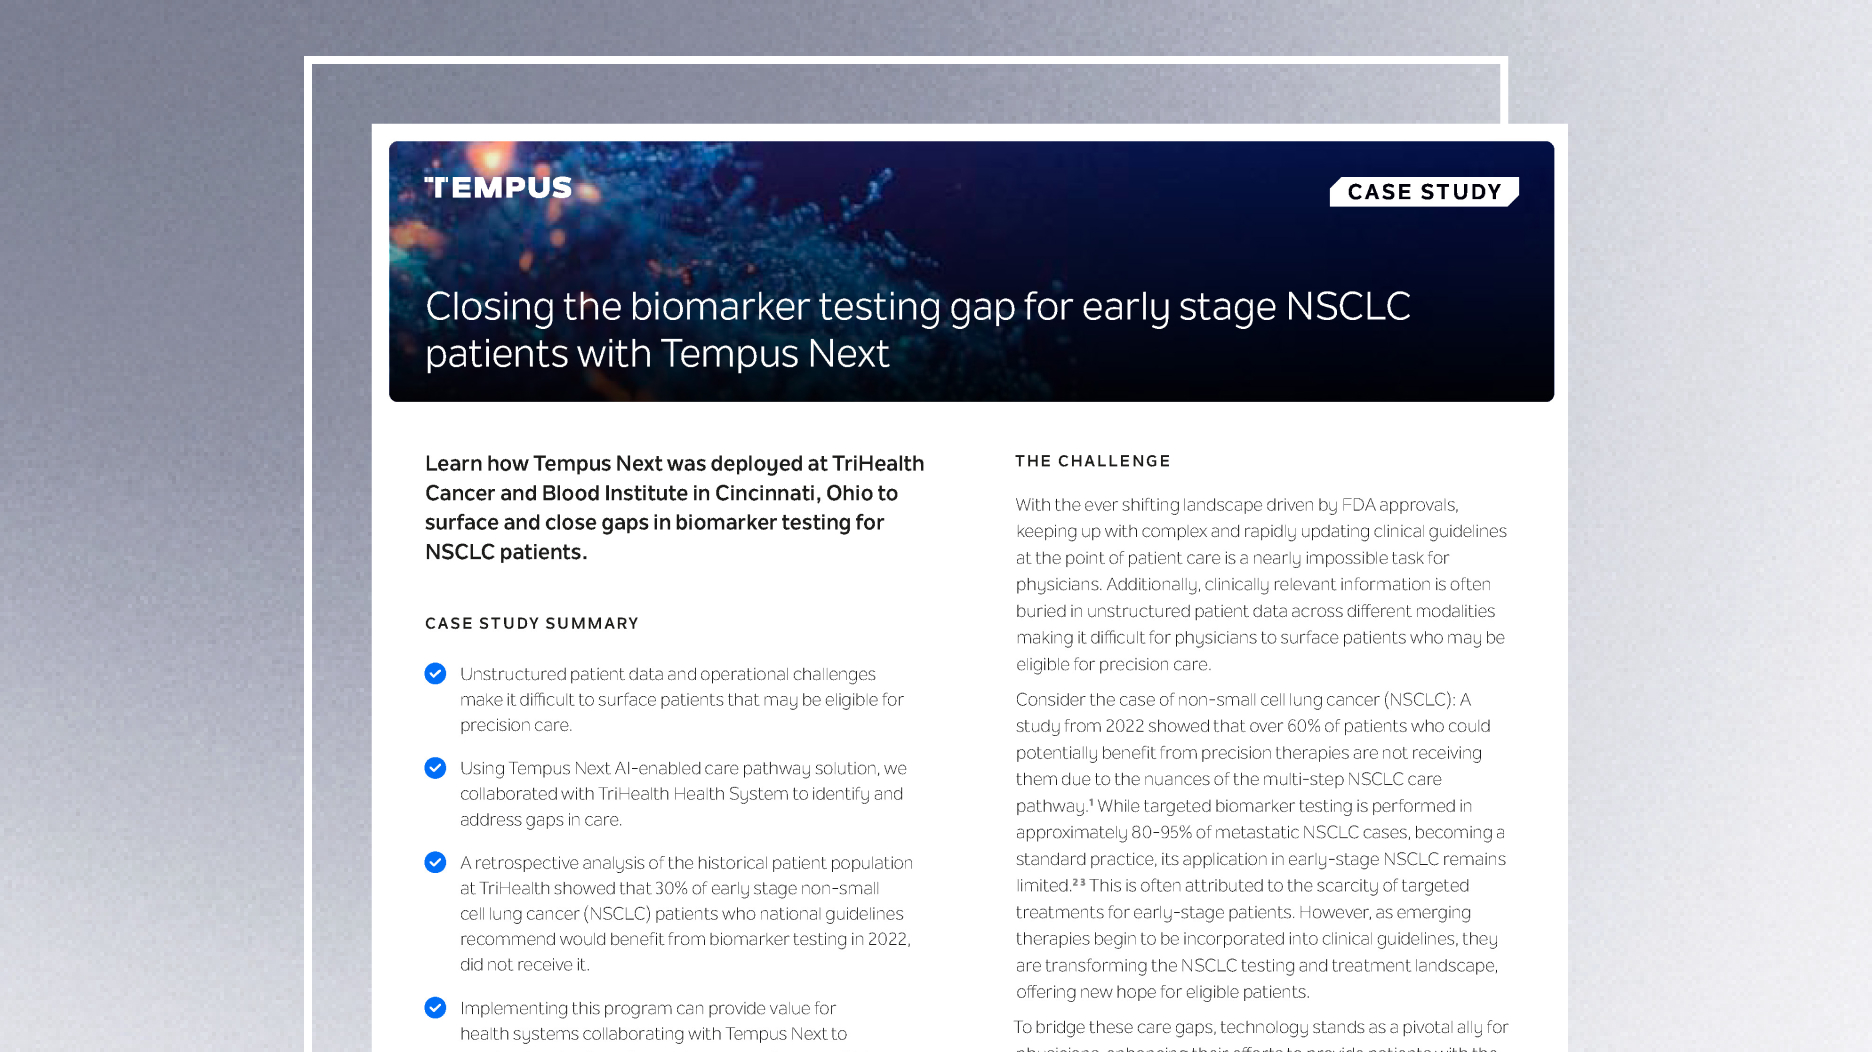 Closing the biomarker testing gap for early stage NSCLC patients with Tempus Next